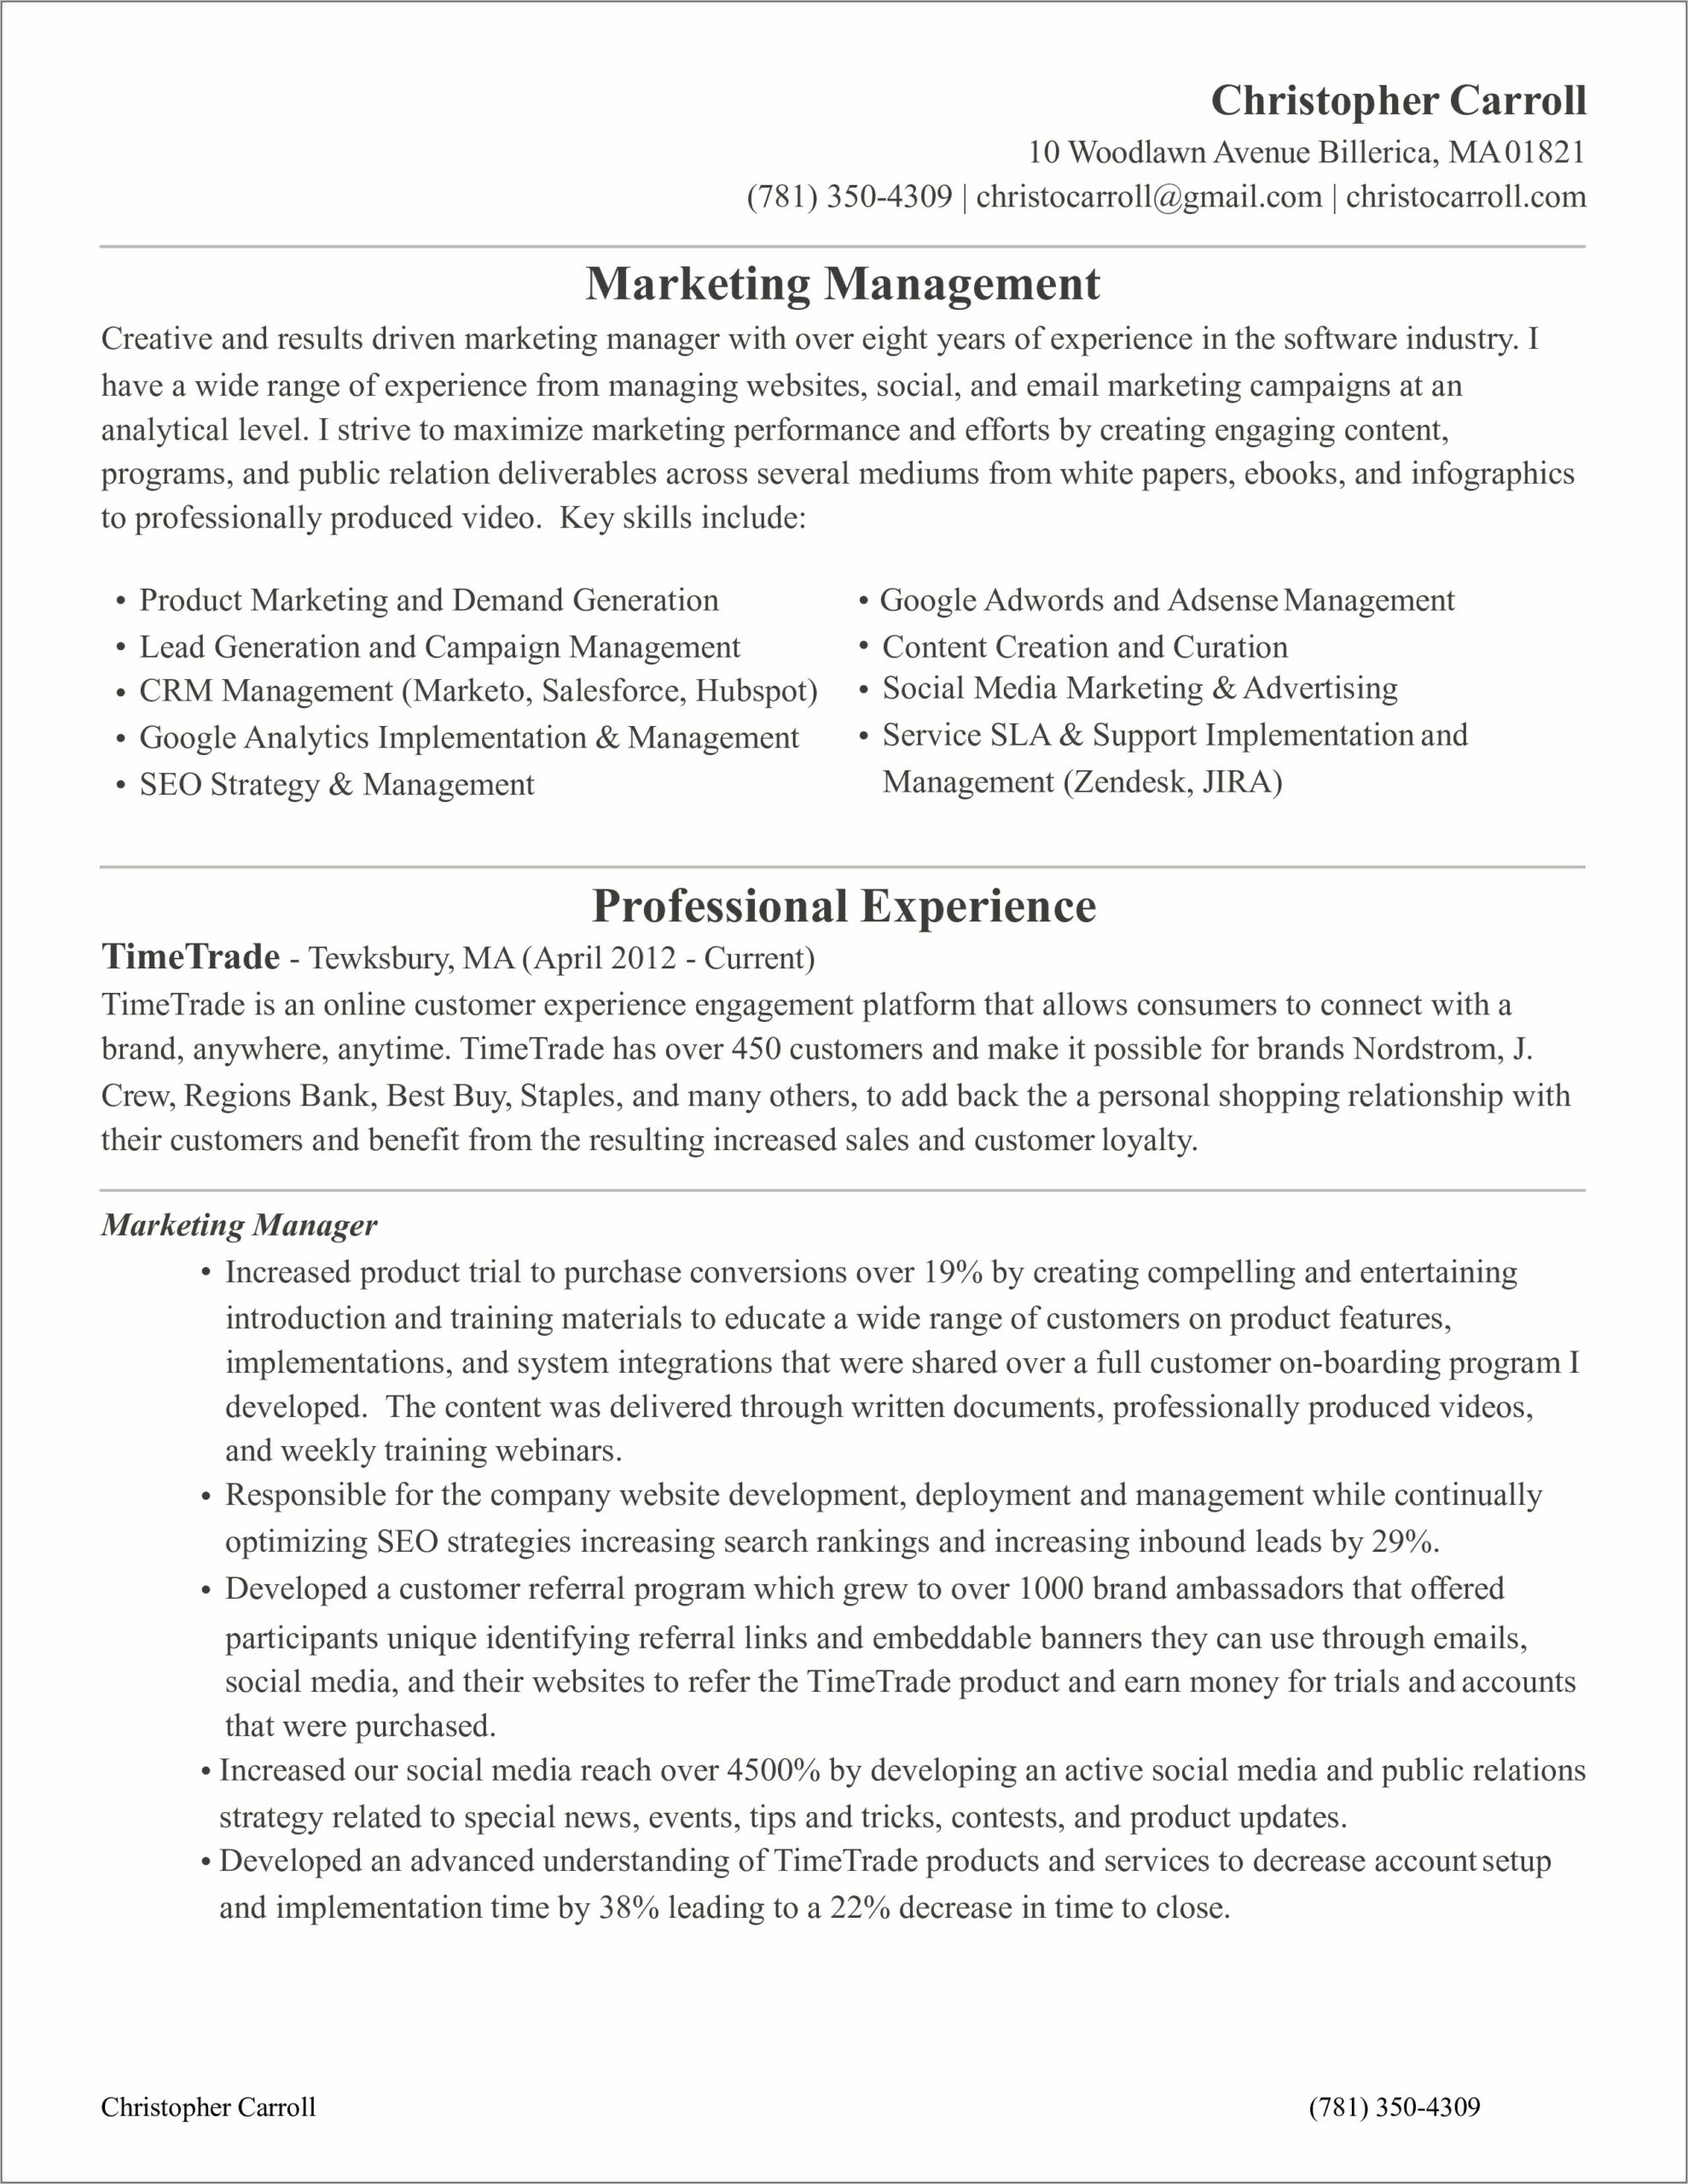 Entry Level Product Marketing Manager Resume Template